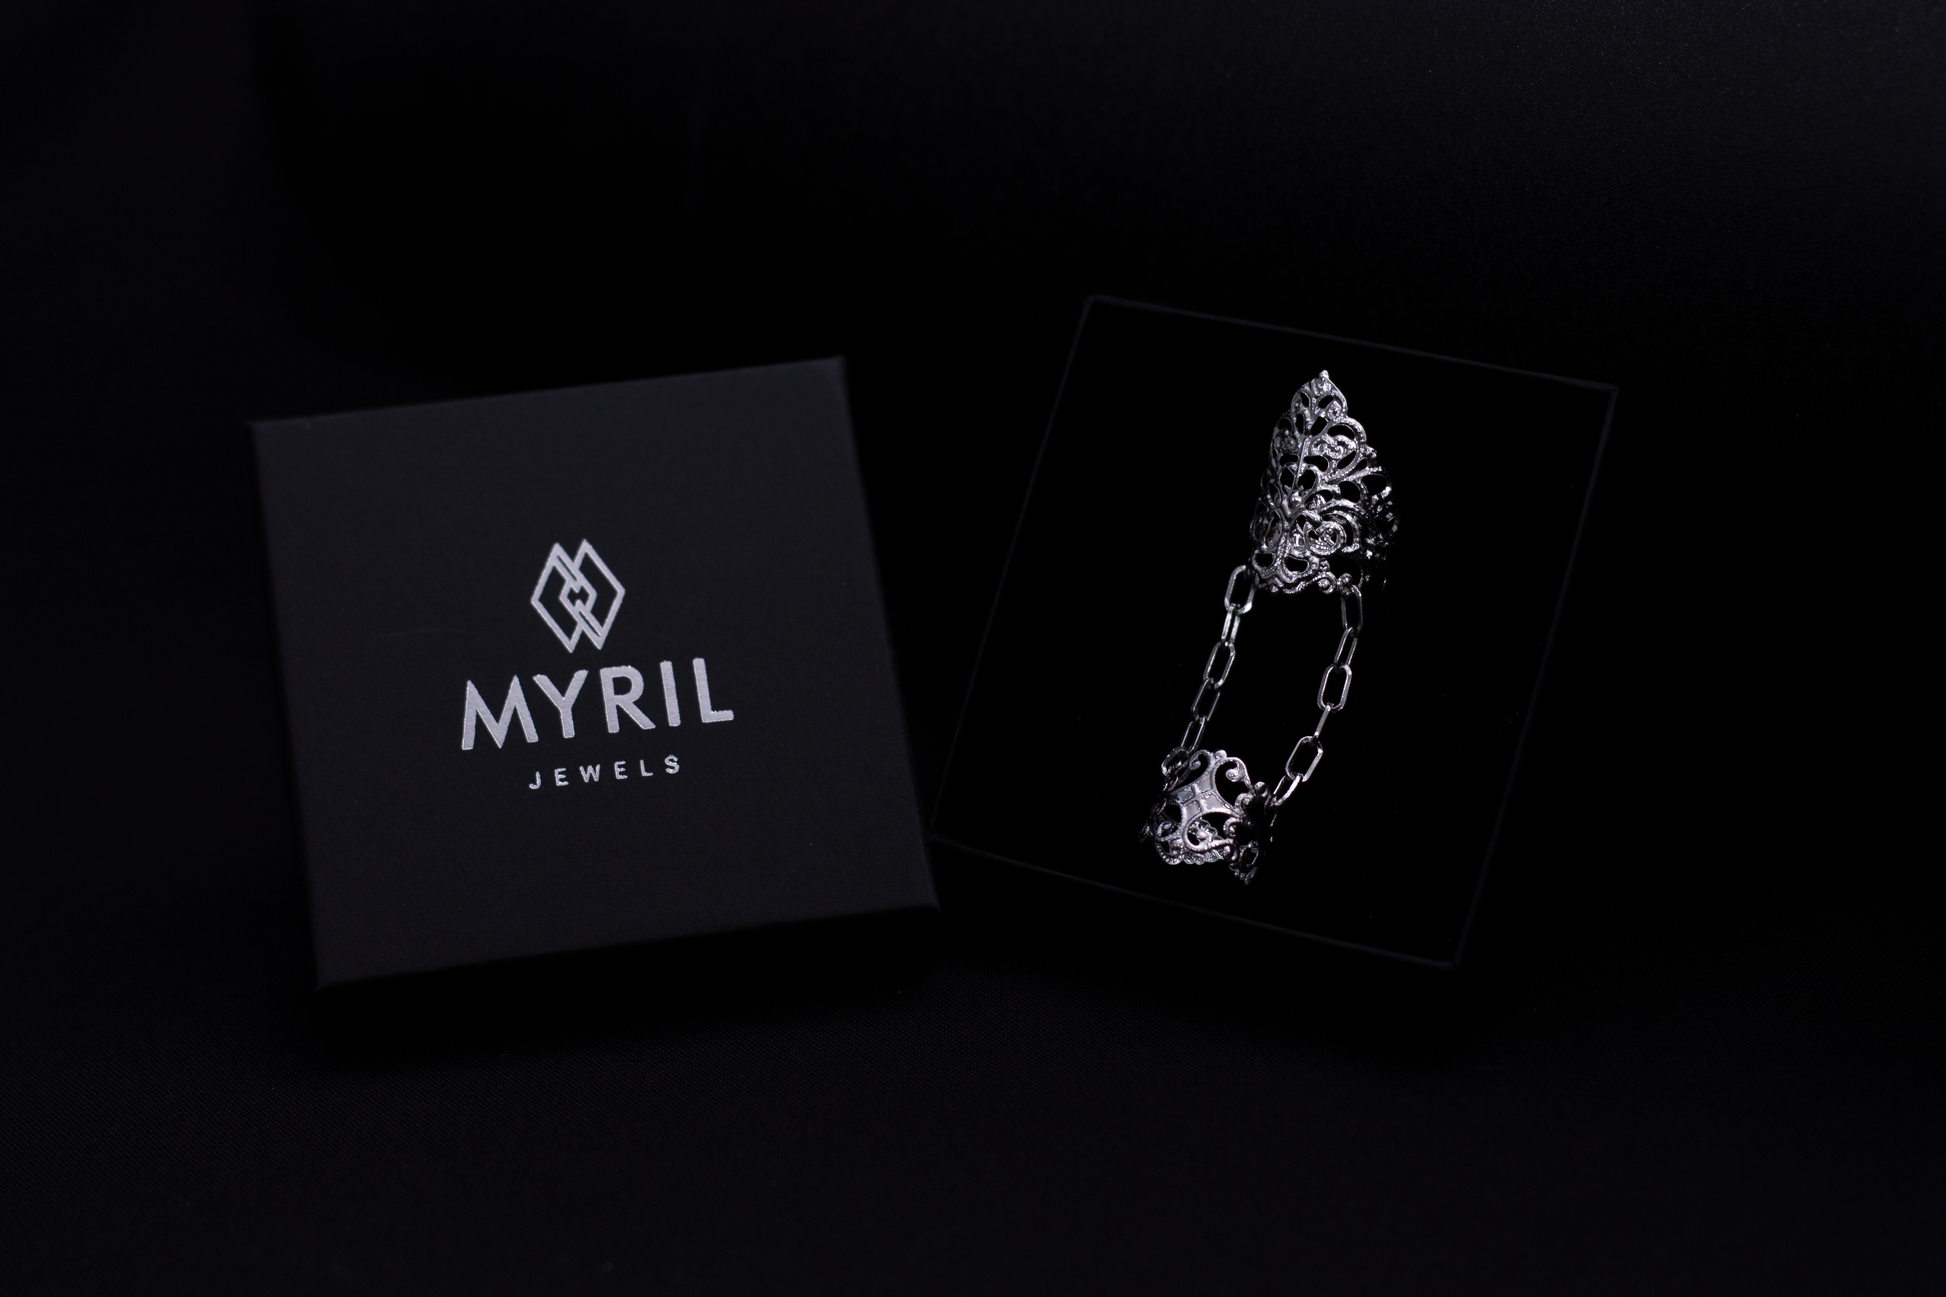 Discover the allure of Myril Jewels with this exquisite gothic double ring, displayed against a sleek, branded black box. This signature piece embodies the essence of neo-gothic jewelry, perfect for goth enthusiasts seeking a bold, witchcore-inspired statement. Ideal for Halloween, rave parties, or as a cherished gift for someone special.